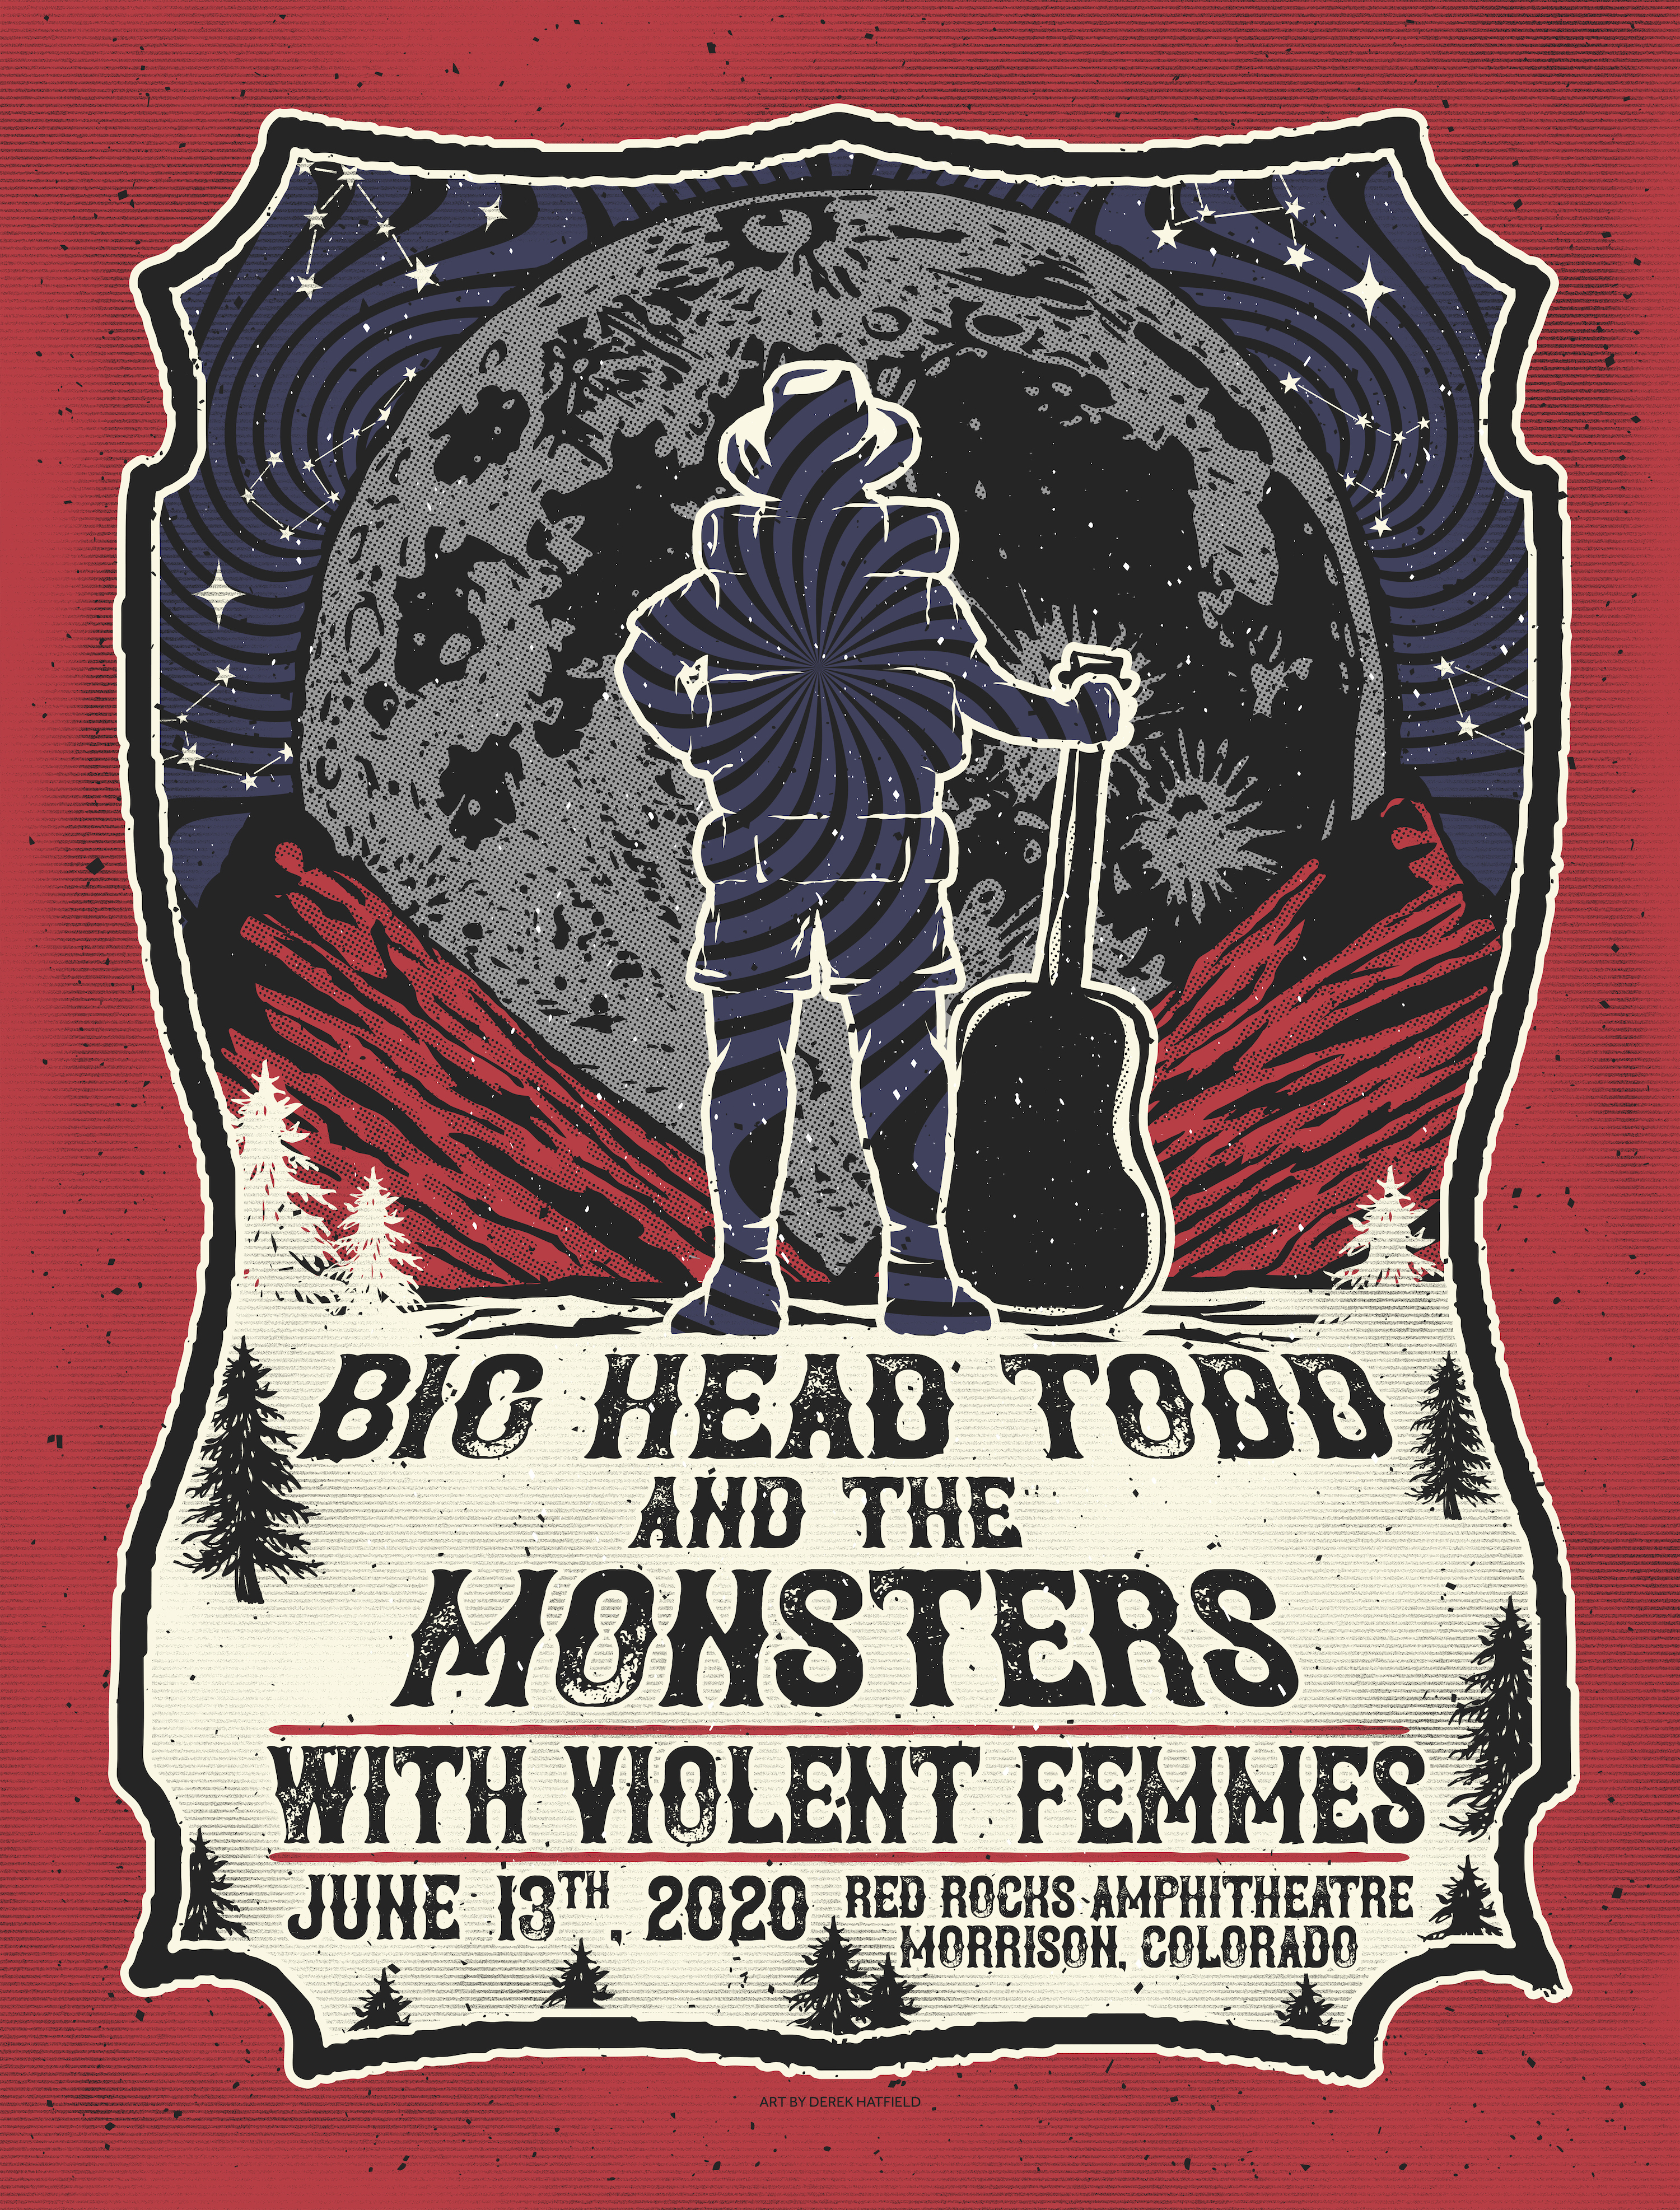 Just Announced: Red Rocks with Violent Femmes!